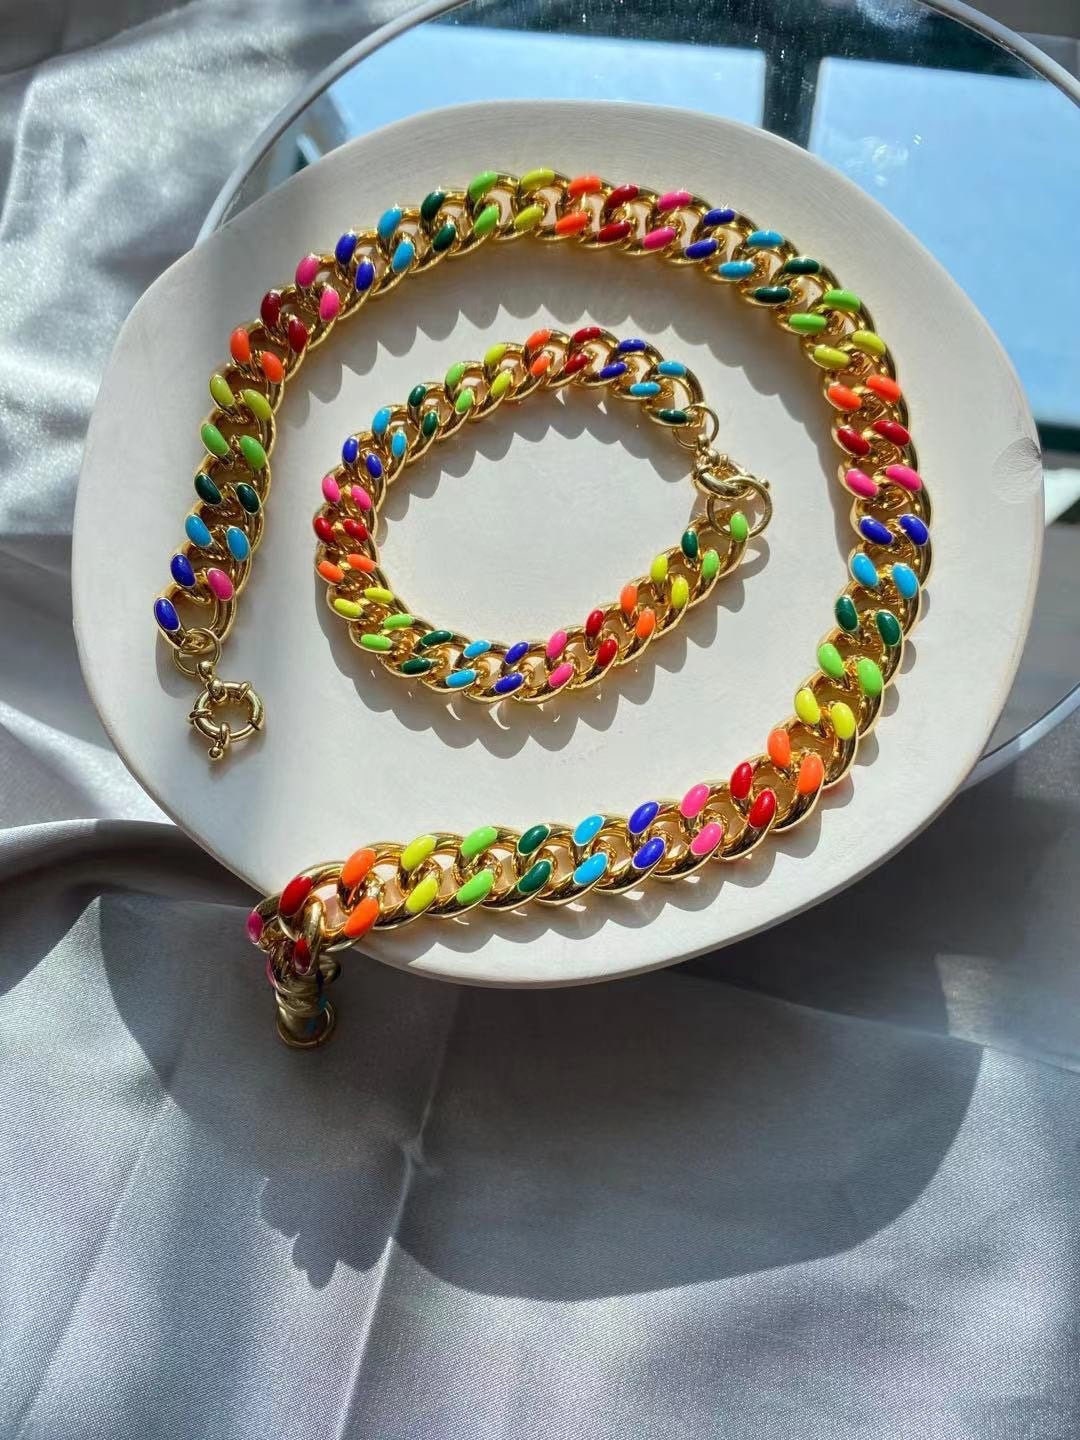 Rainbow Gold Chain Necklace - Thick Colourful Statement Jewelry Design 5 Cuban Chain Choker + Pearl Choker